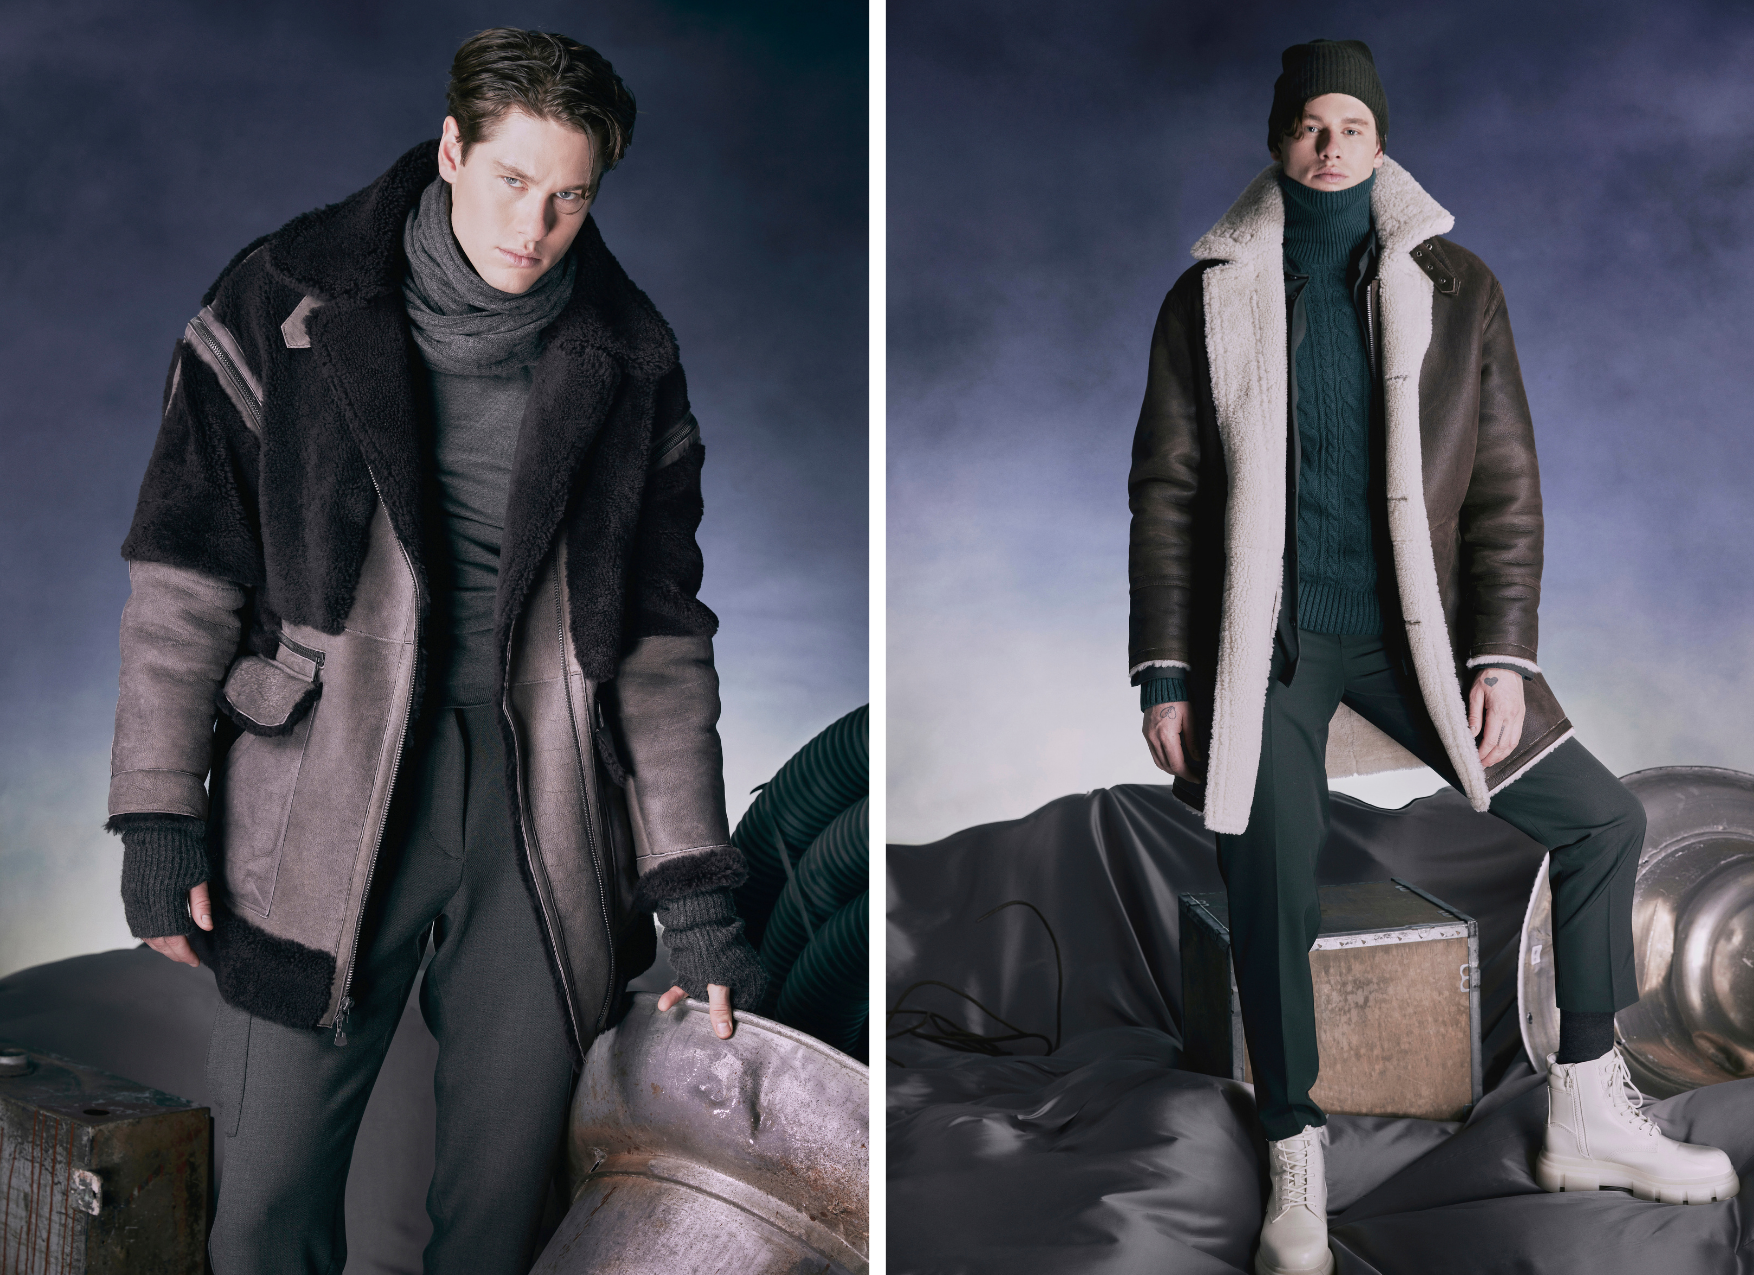 From left to right: Guardian: 34' wool in wool panels. Converts to vest with zip off sleeves. This zip-front black coat. Oversized notched collar, Interior zipper pocket. Chance: Arabica nappa coat which reverses to a curly wool teddy. Fits true to size. Fits comfortably across the shoulders, loose-fit through the torso. 37 in long. Zip closure & button closure, notch collar. Slash pockets on nappa side & patch pockets on curly wool side.